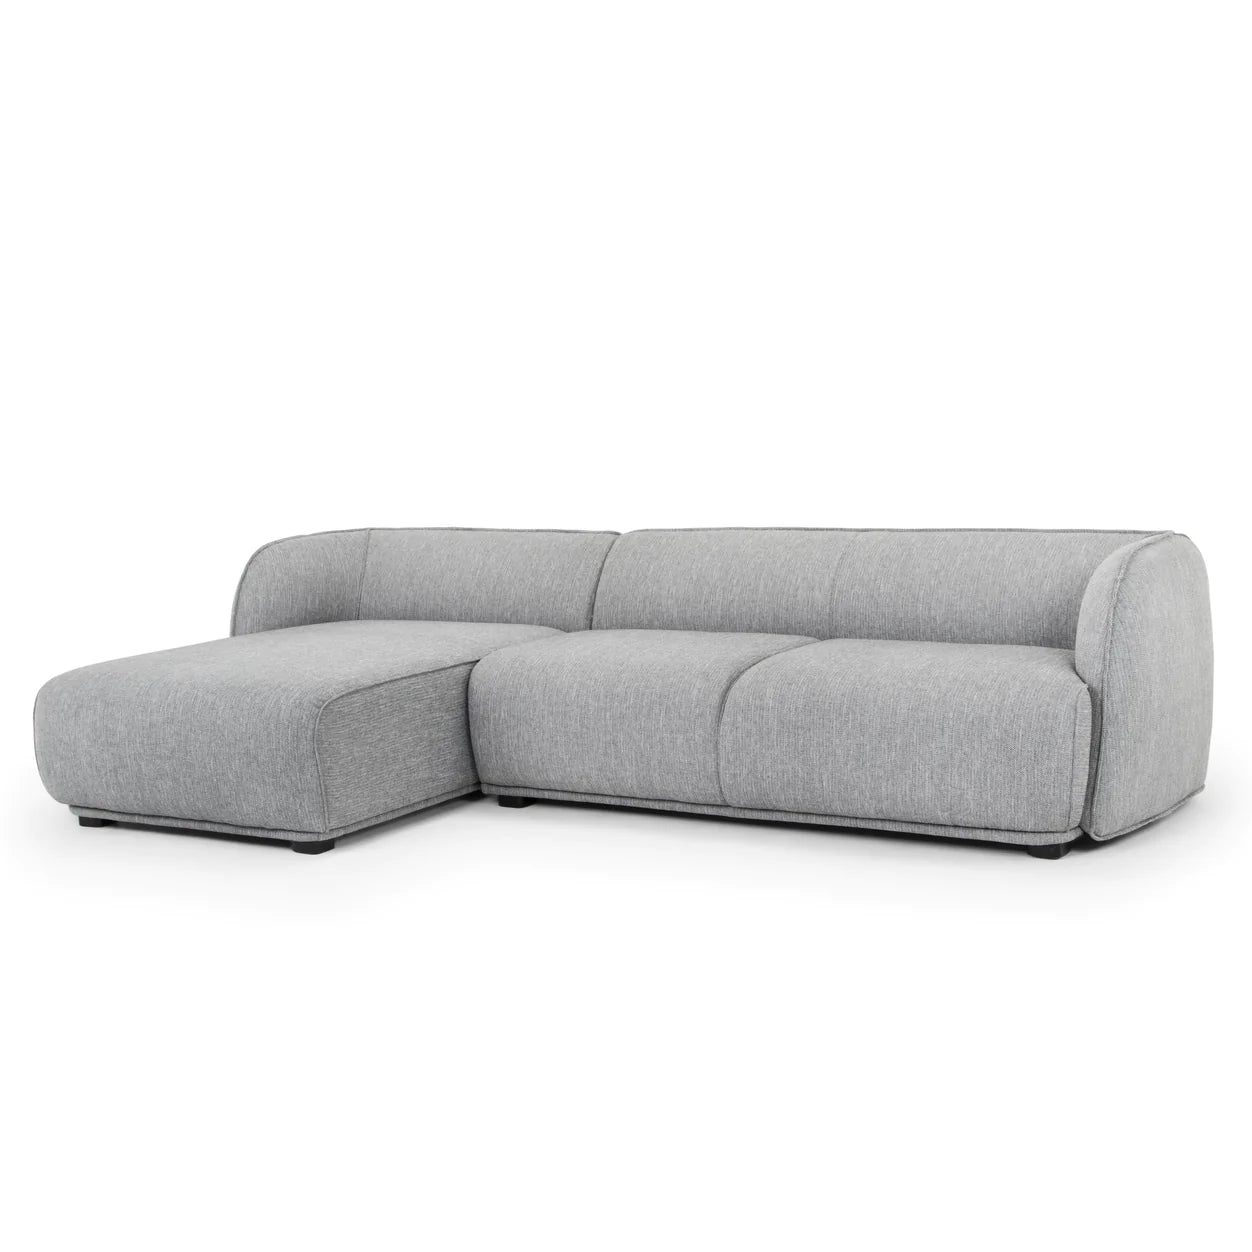 Troy 3 Seater Left Chaise Sofa (Graphite Grey)